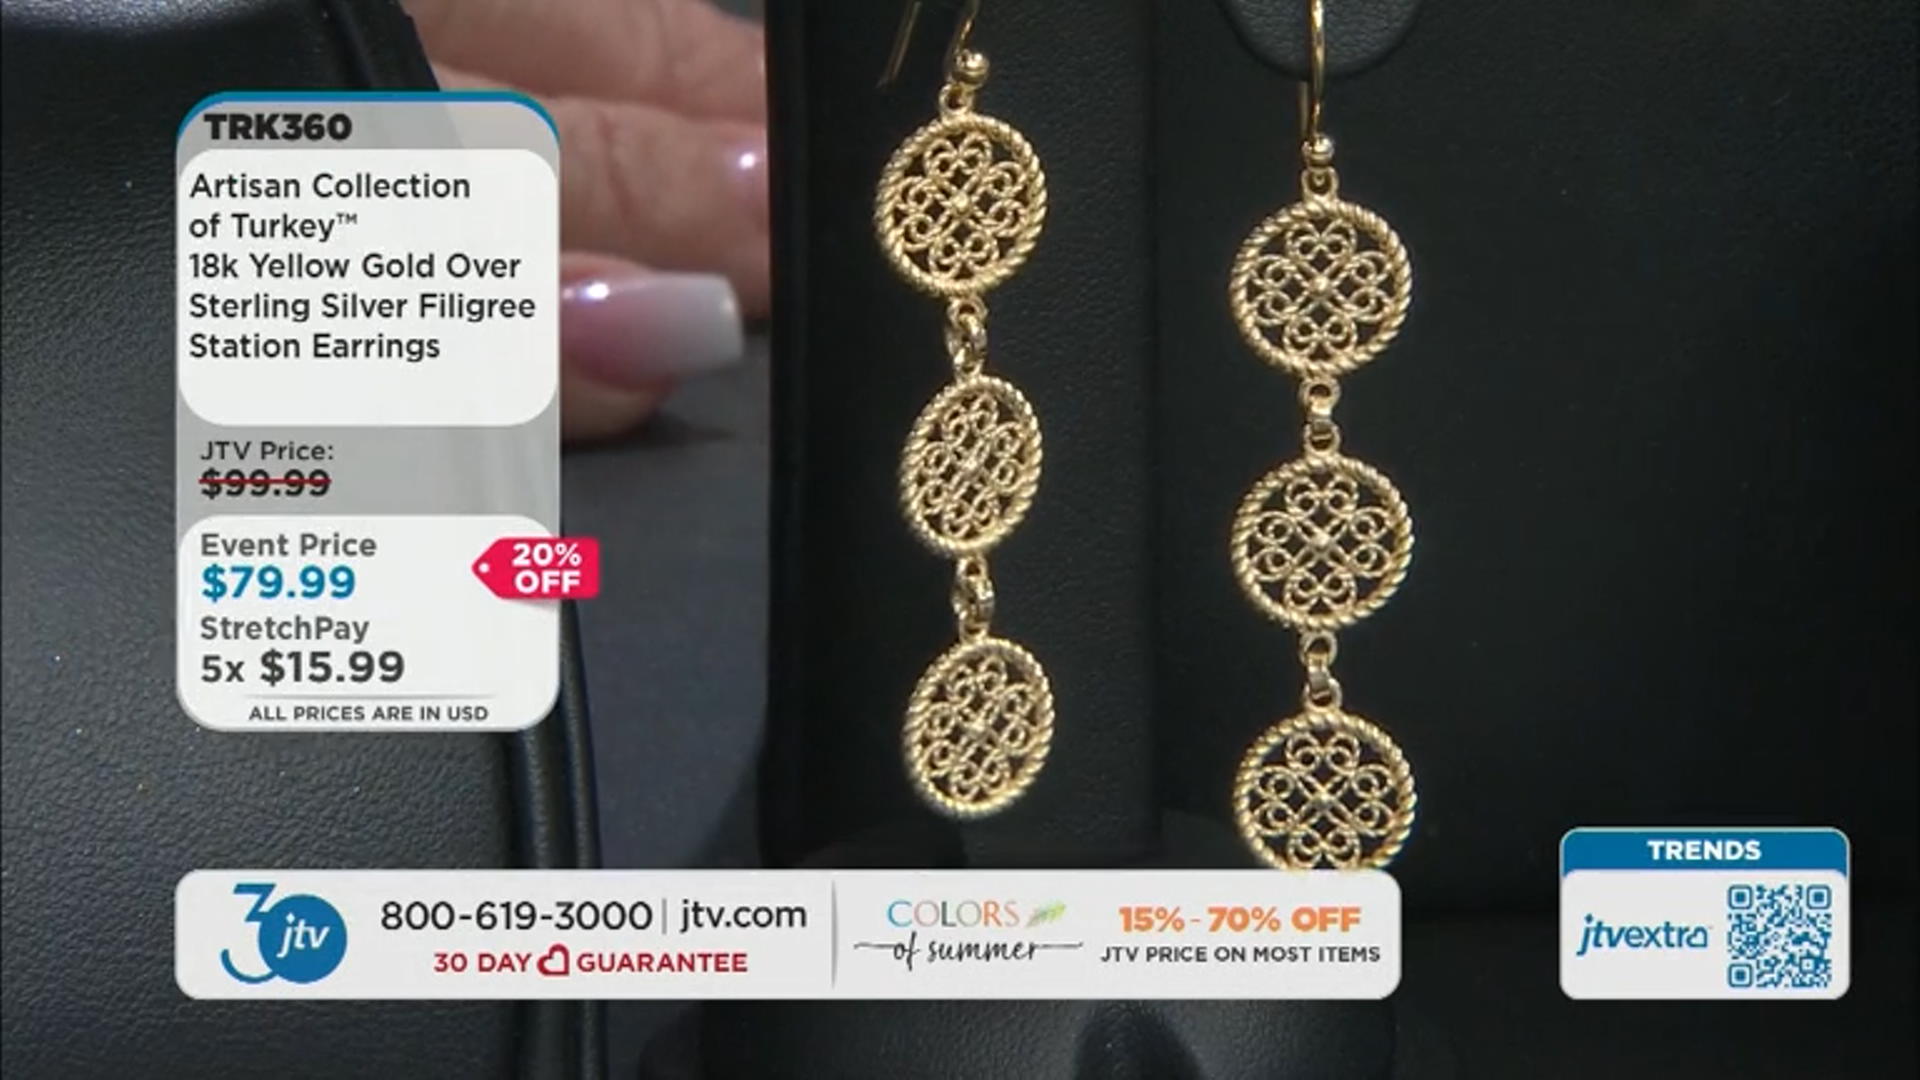 18k Yellow Gold Over Sterling Silver Filigree Station Earrings Video Thumbnail